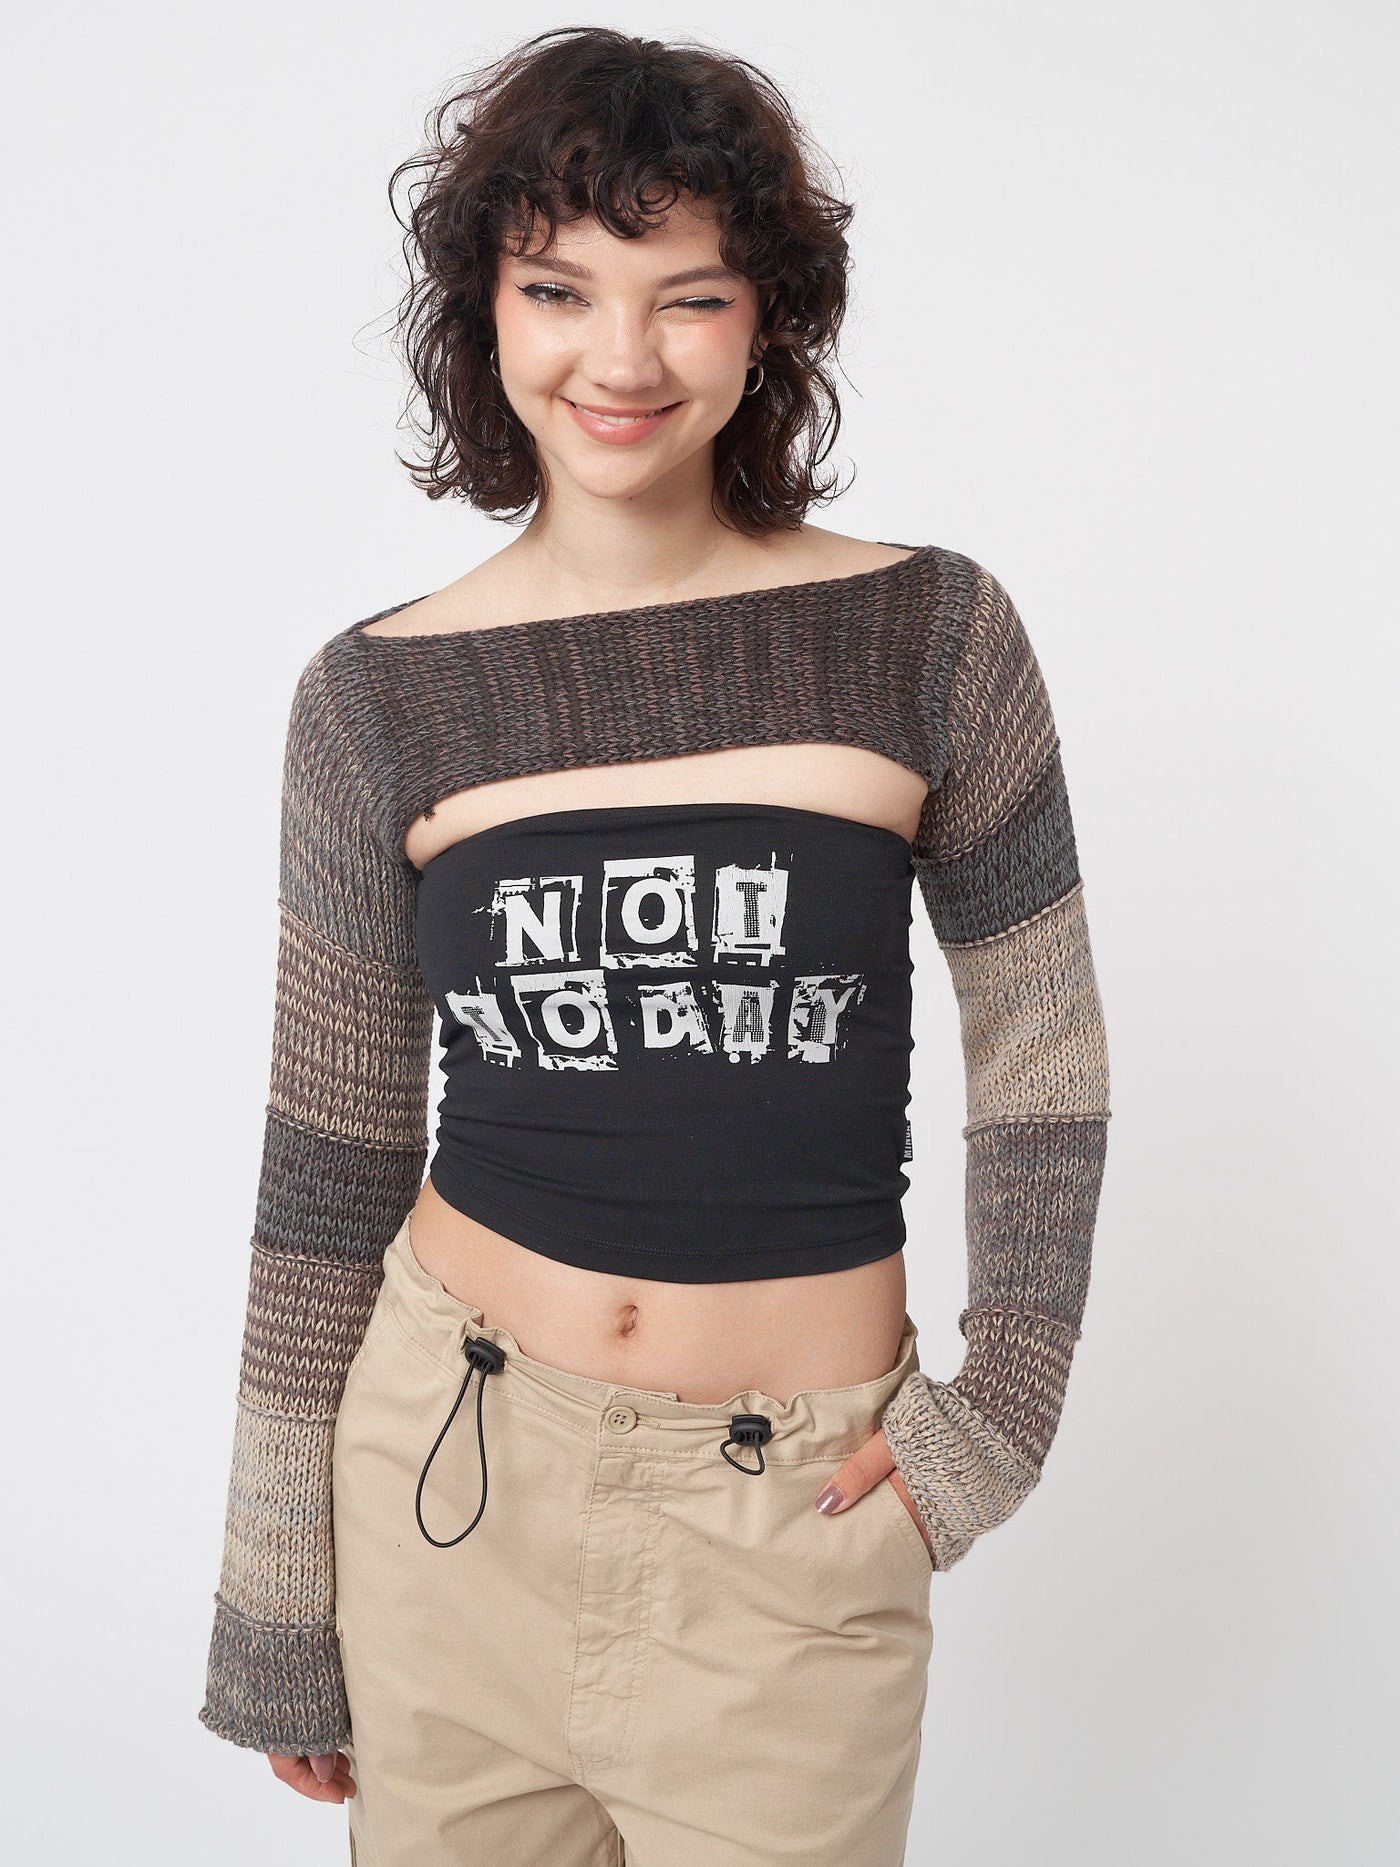 Fusion Brown Patchwork Knitted Shrug Top - Minga  US